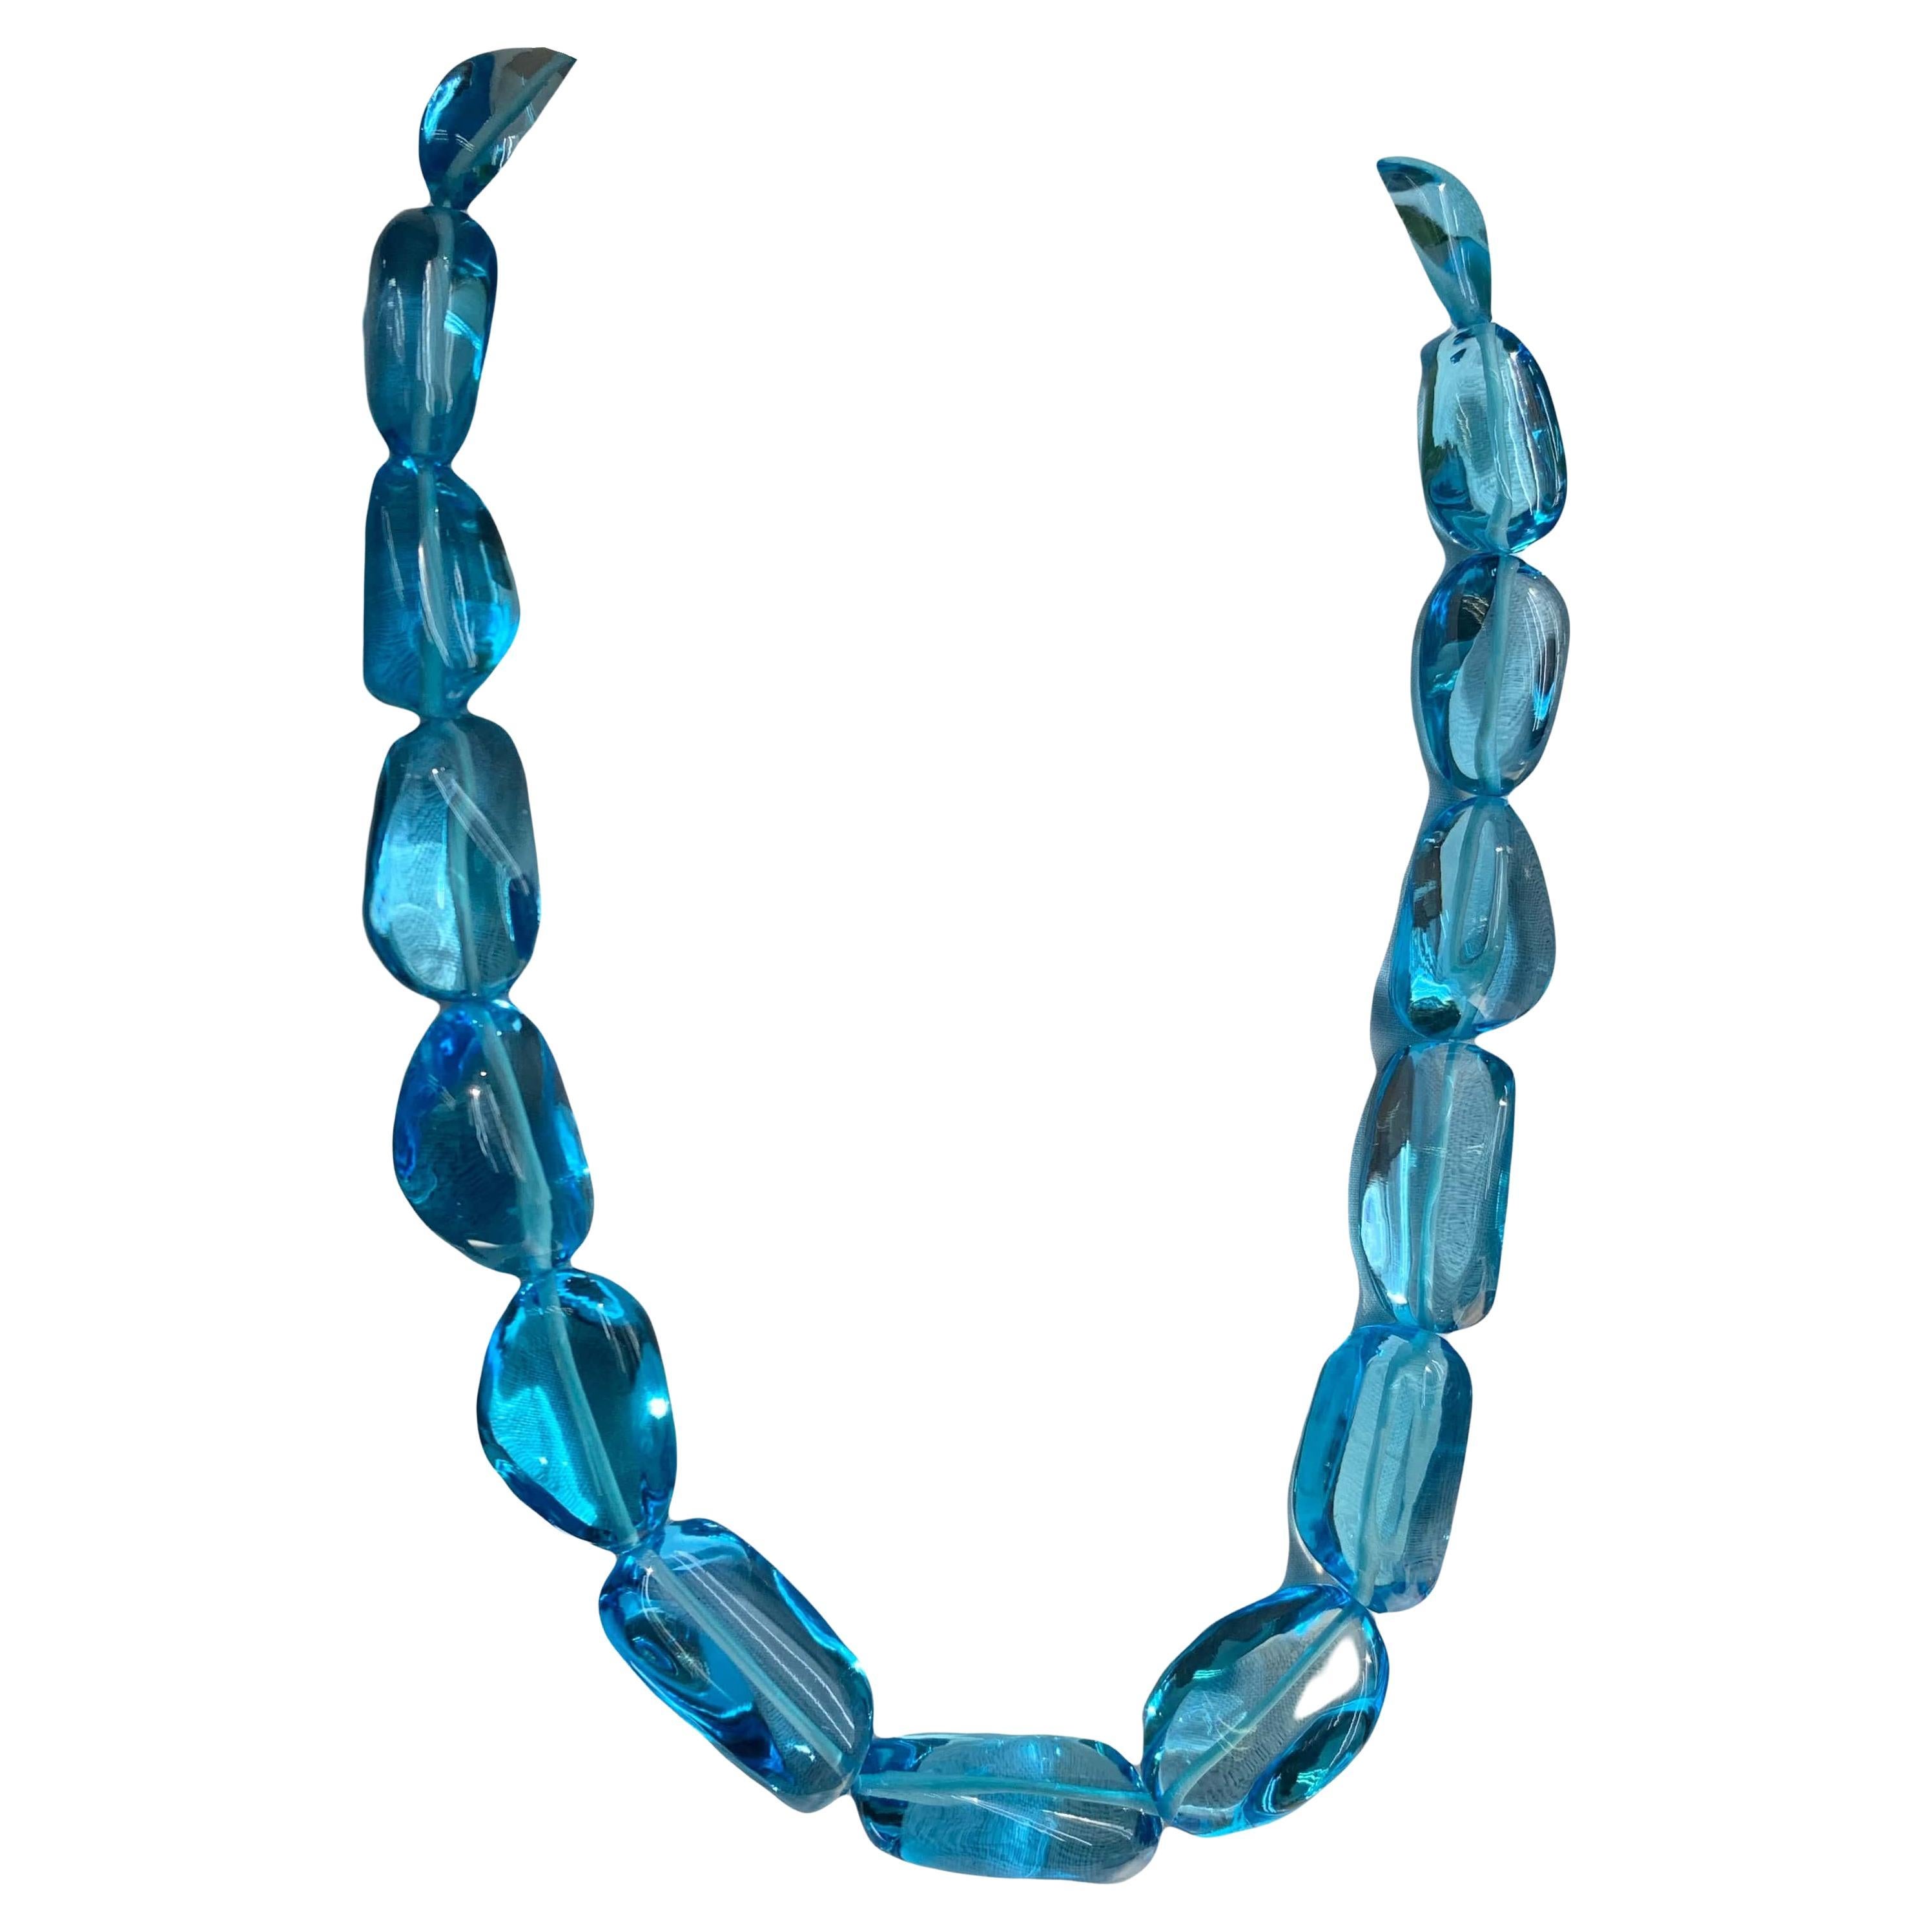 819 Carat Victorian Inspired Blue Topaz Tumbles Statement Necklace